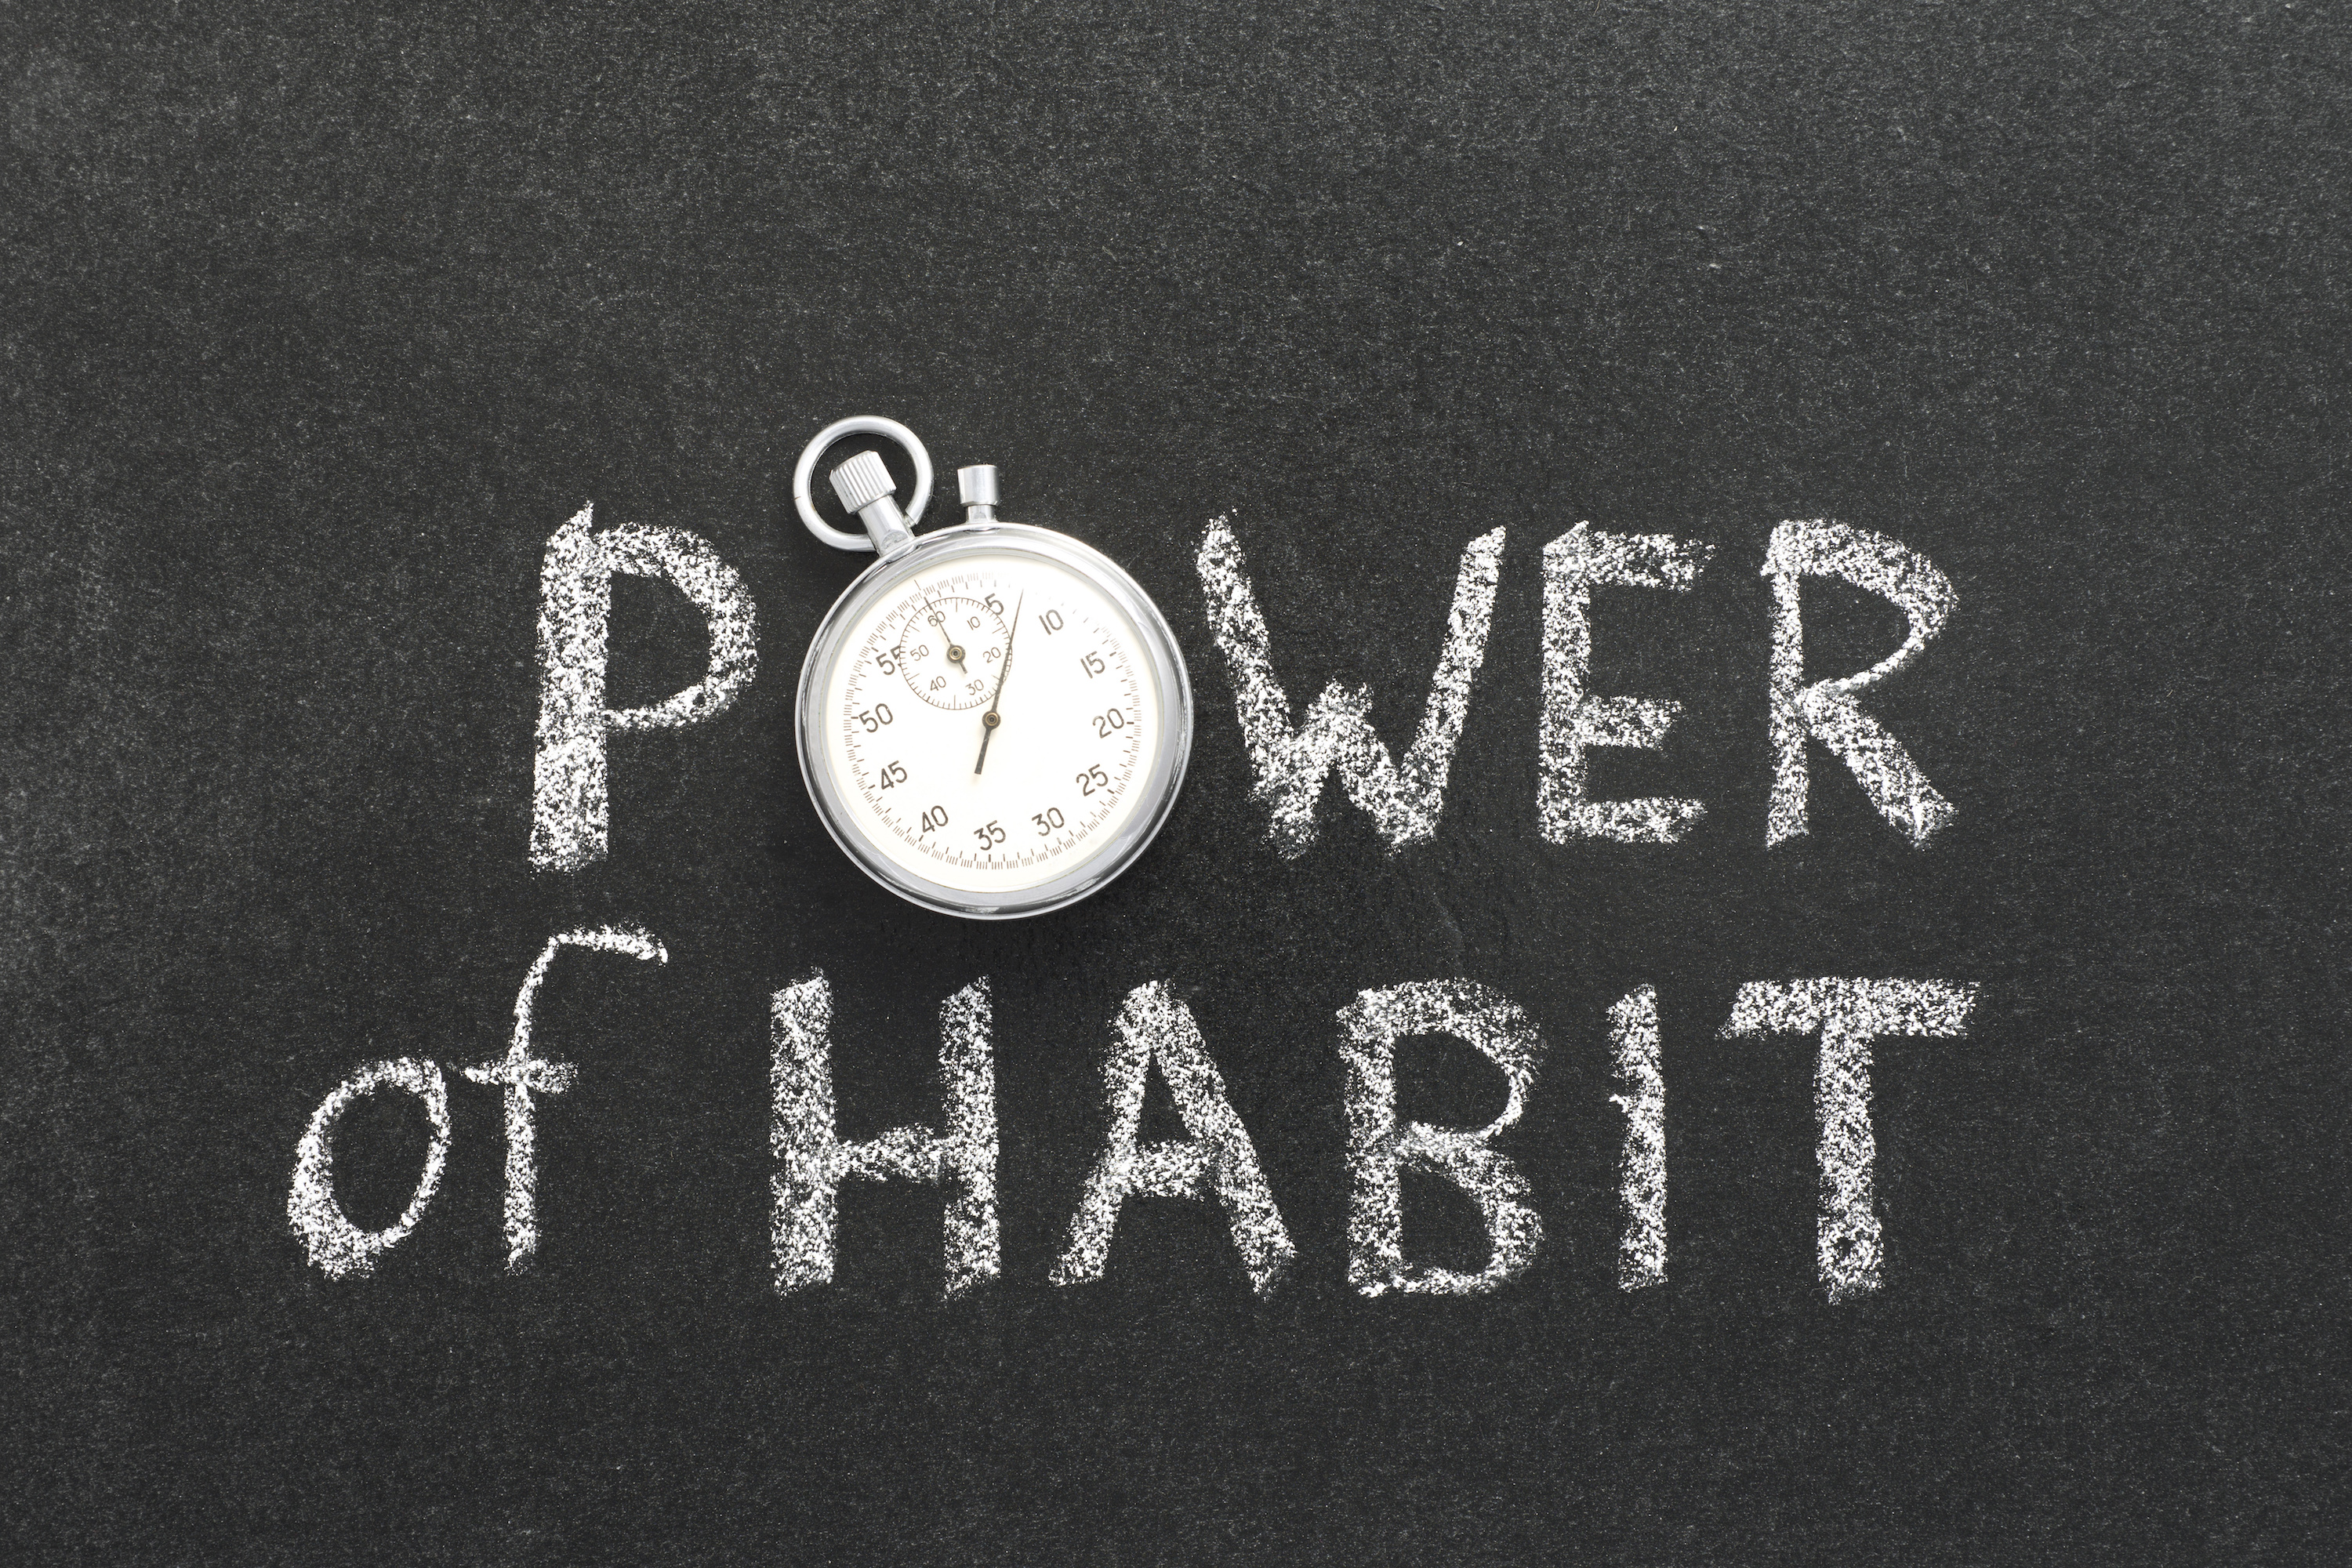 Power of Habit – Germann Consulting Group